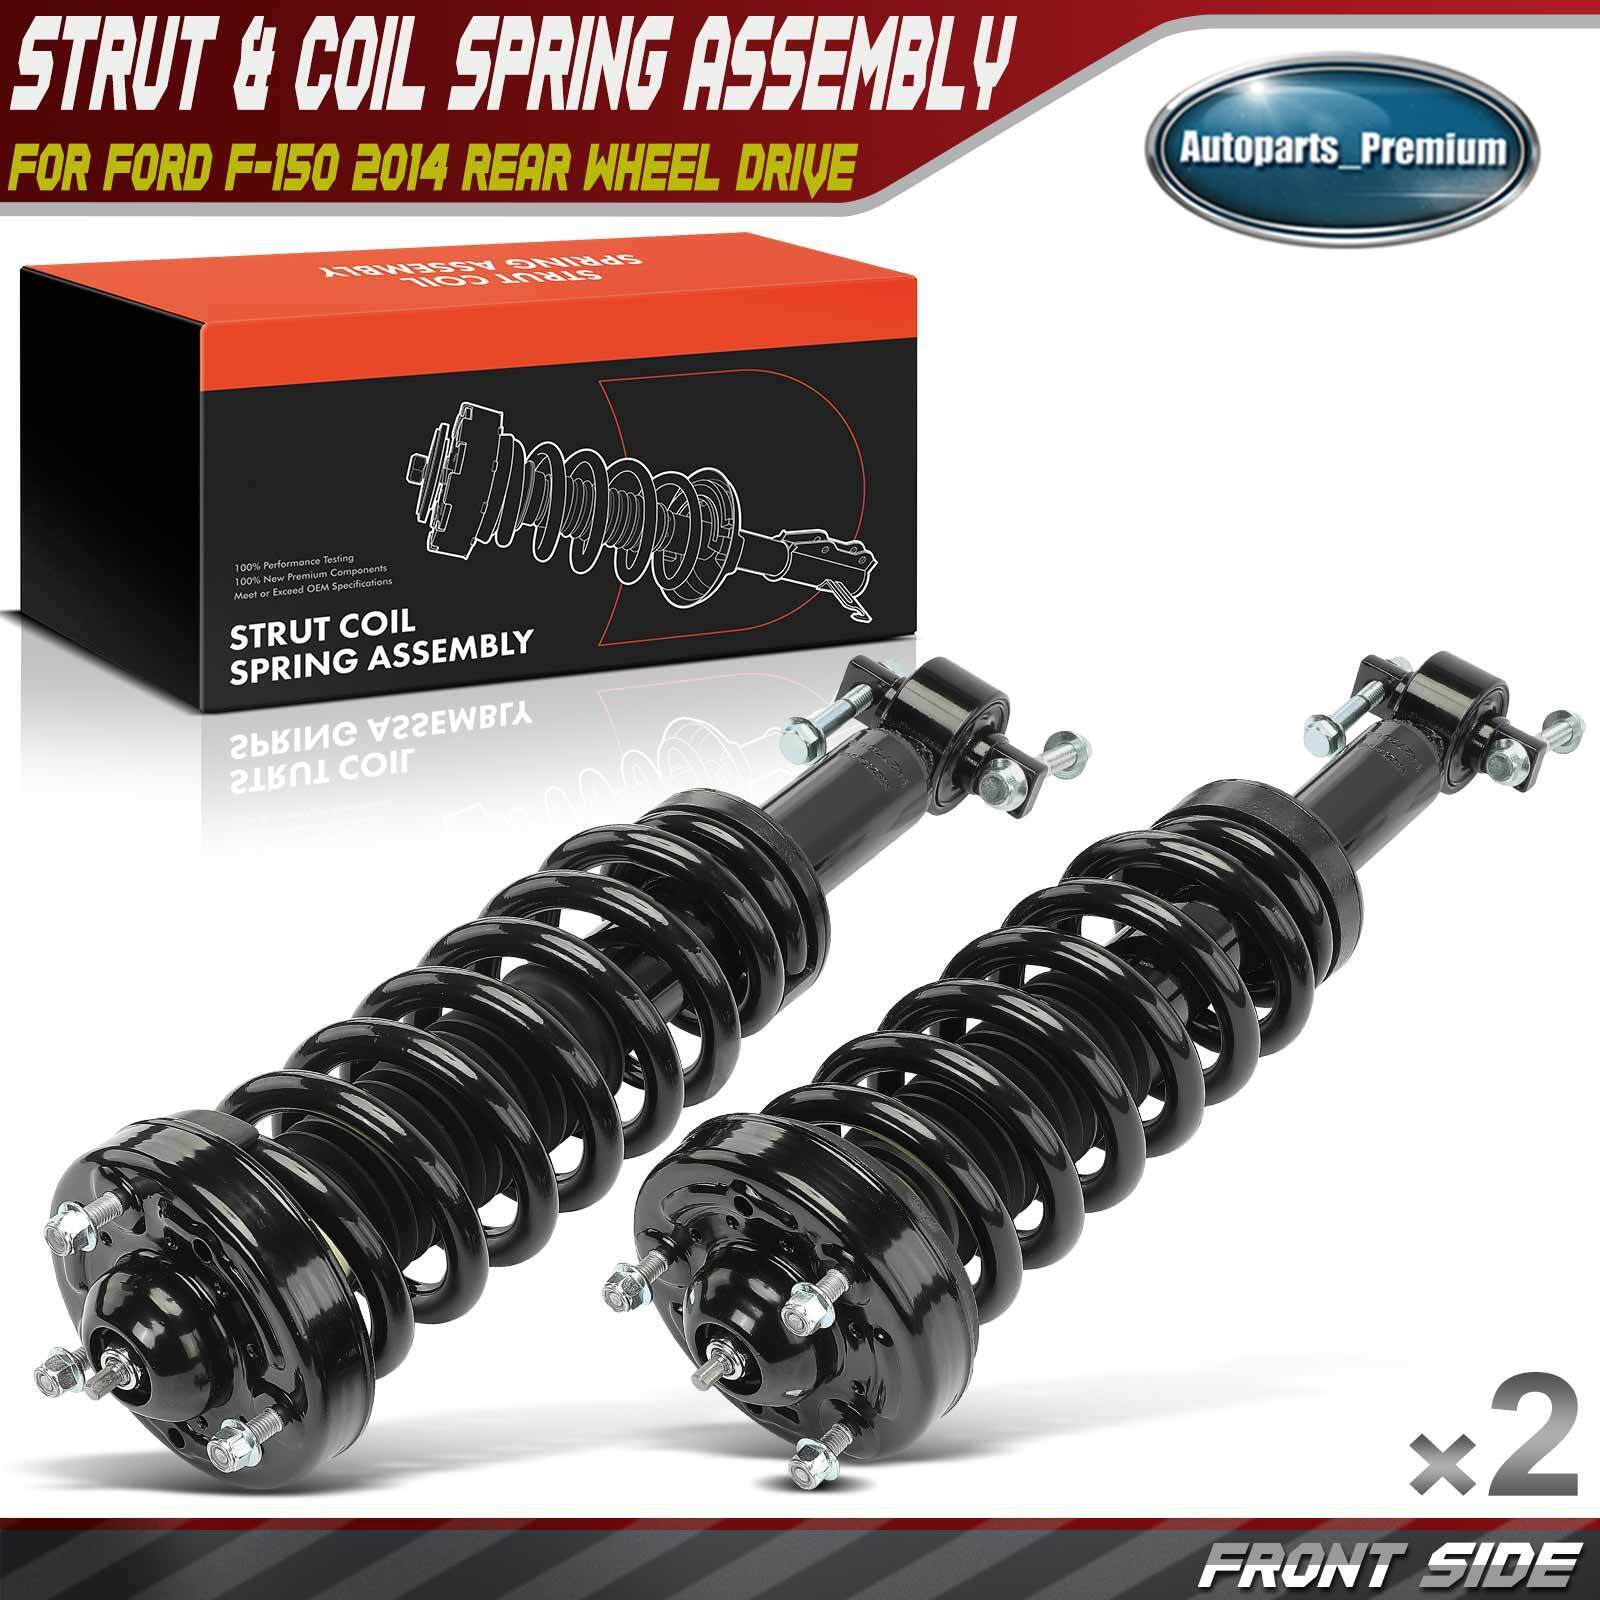 2x Front Side Strut & Coil Spring Assembly for Ford F-150 2014 Rear Wheel Drive